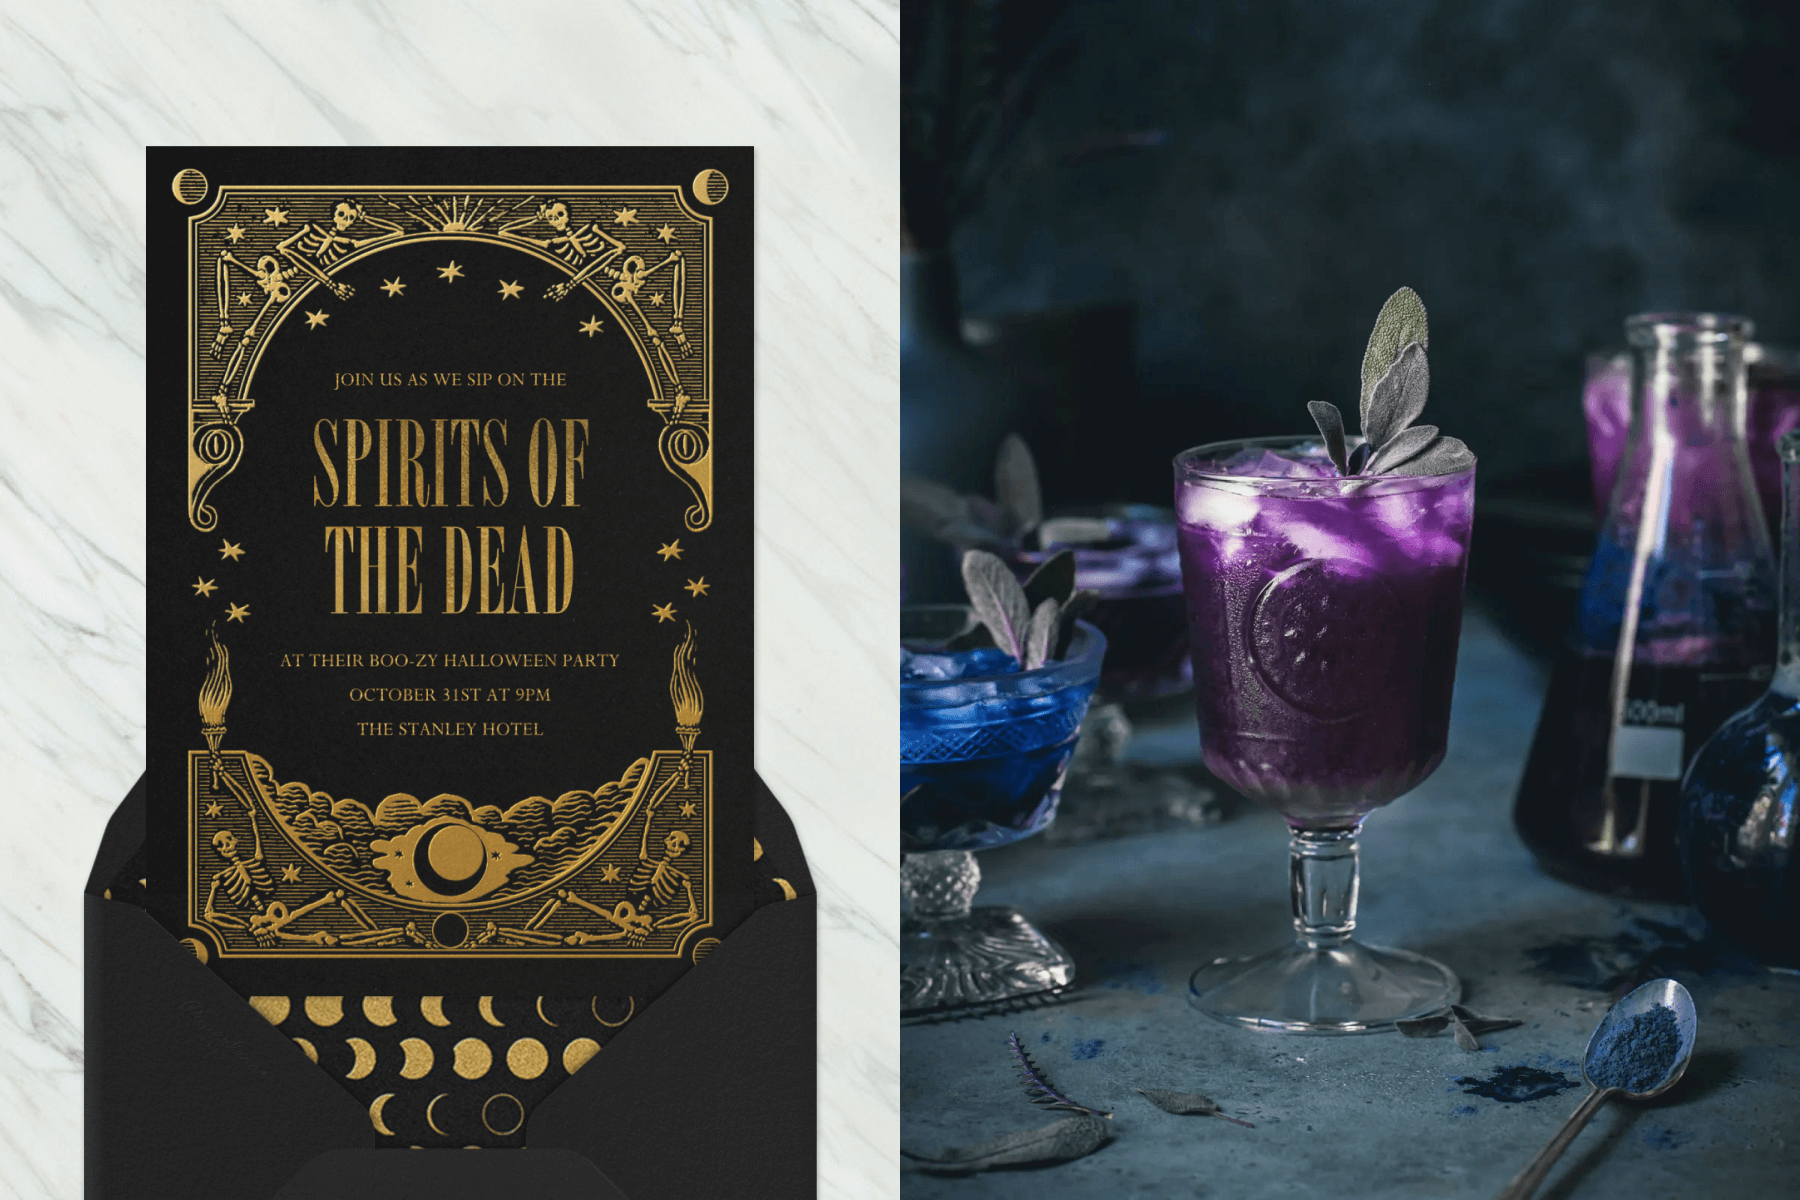 Left: A black “Spirits of the Dead” Halloween party invitation with an ornate gold border of skeletons and the night sky. Right: Purple and blue adult beverages in glass goblets in a dark setting.